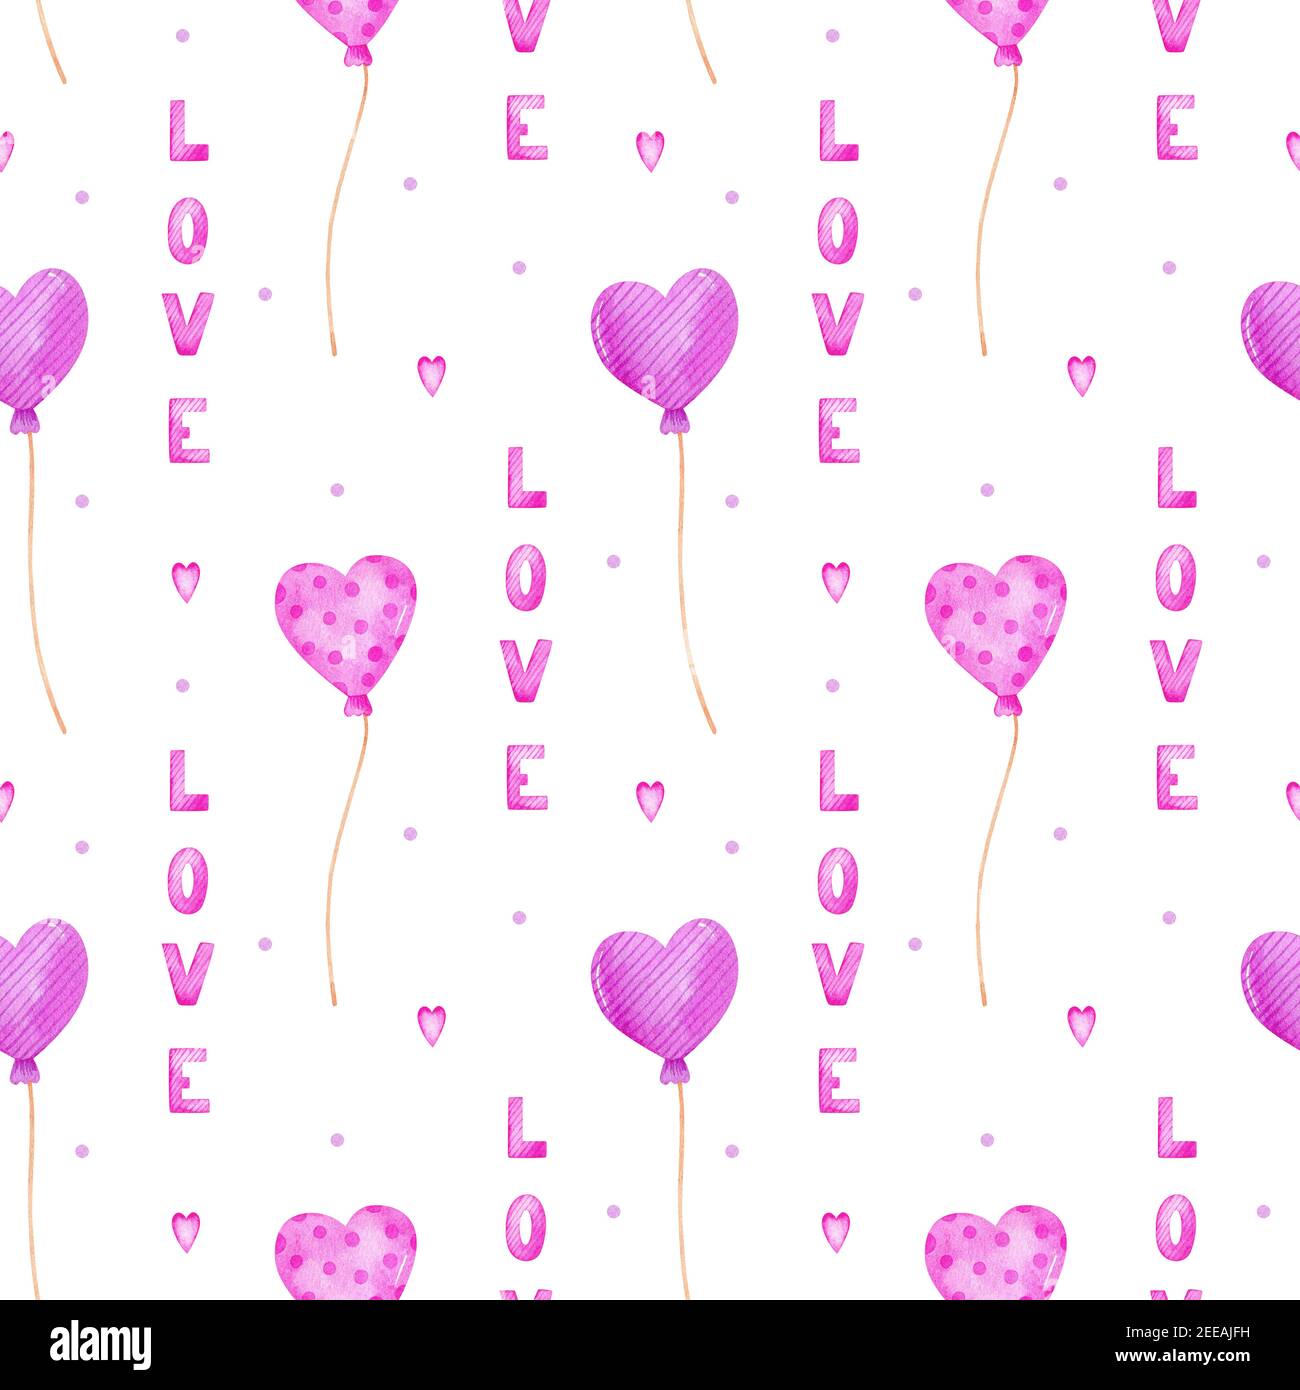 Valentine's day watercolor seamless pattern with pink and purple balloons, hearts and the inscription - Love. Festive romantic design. Stock Photo